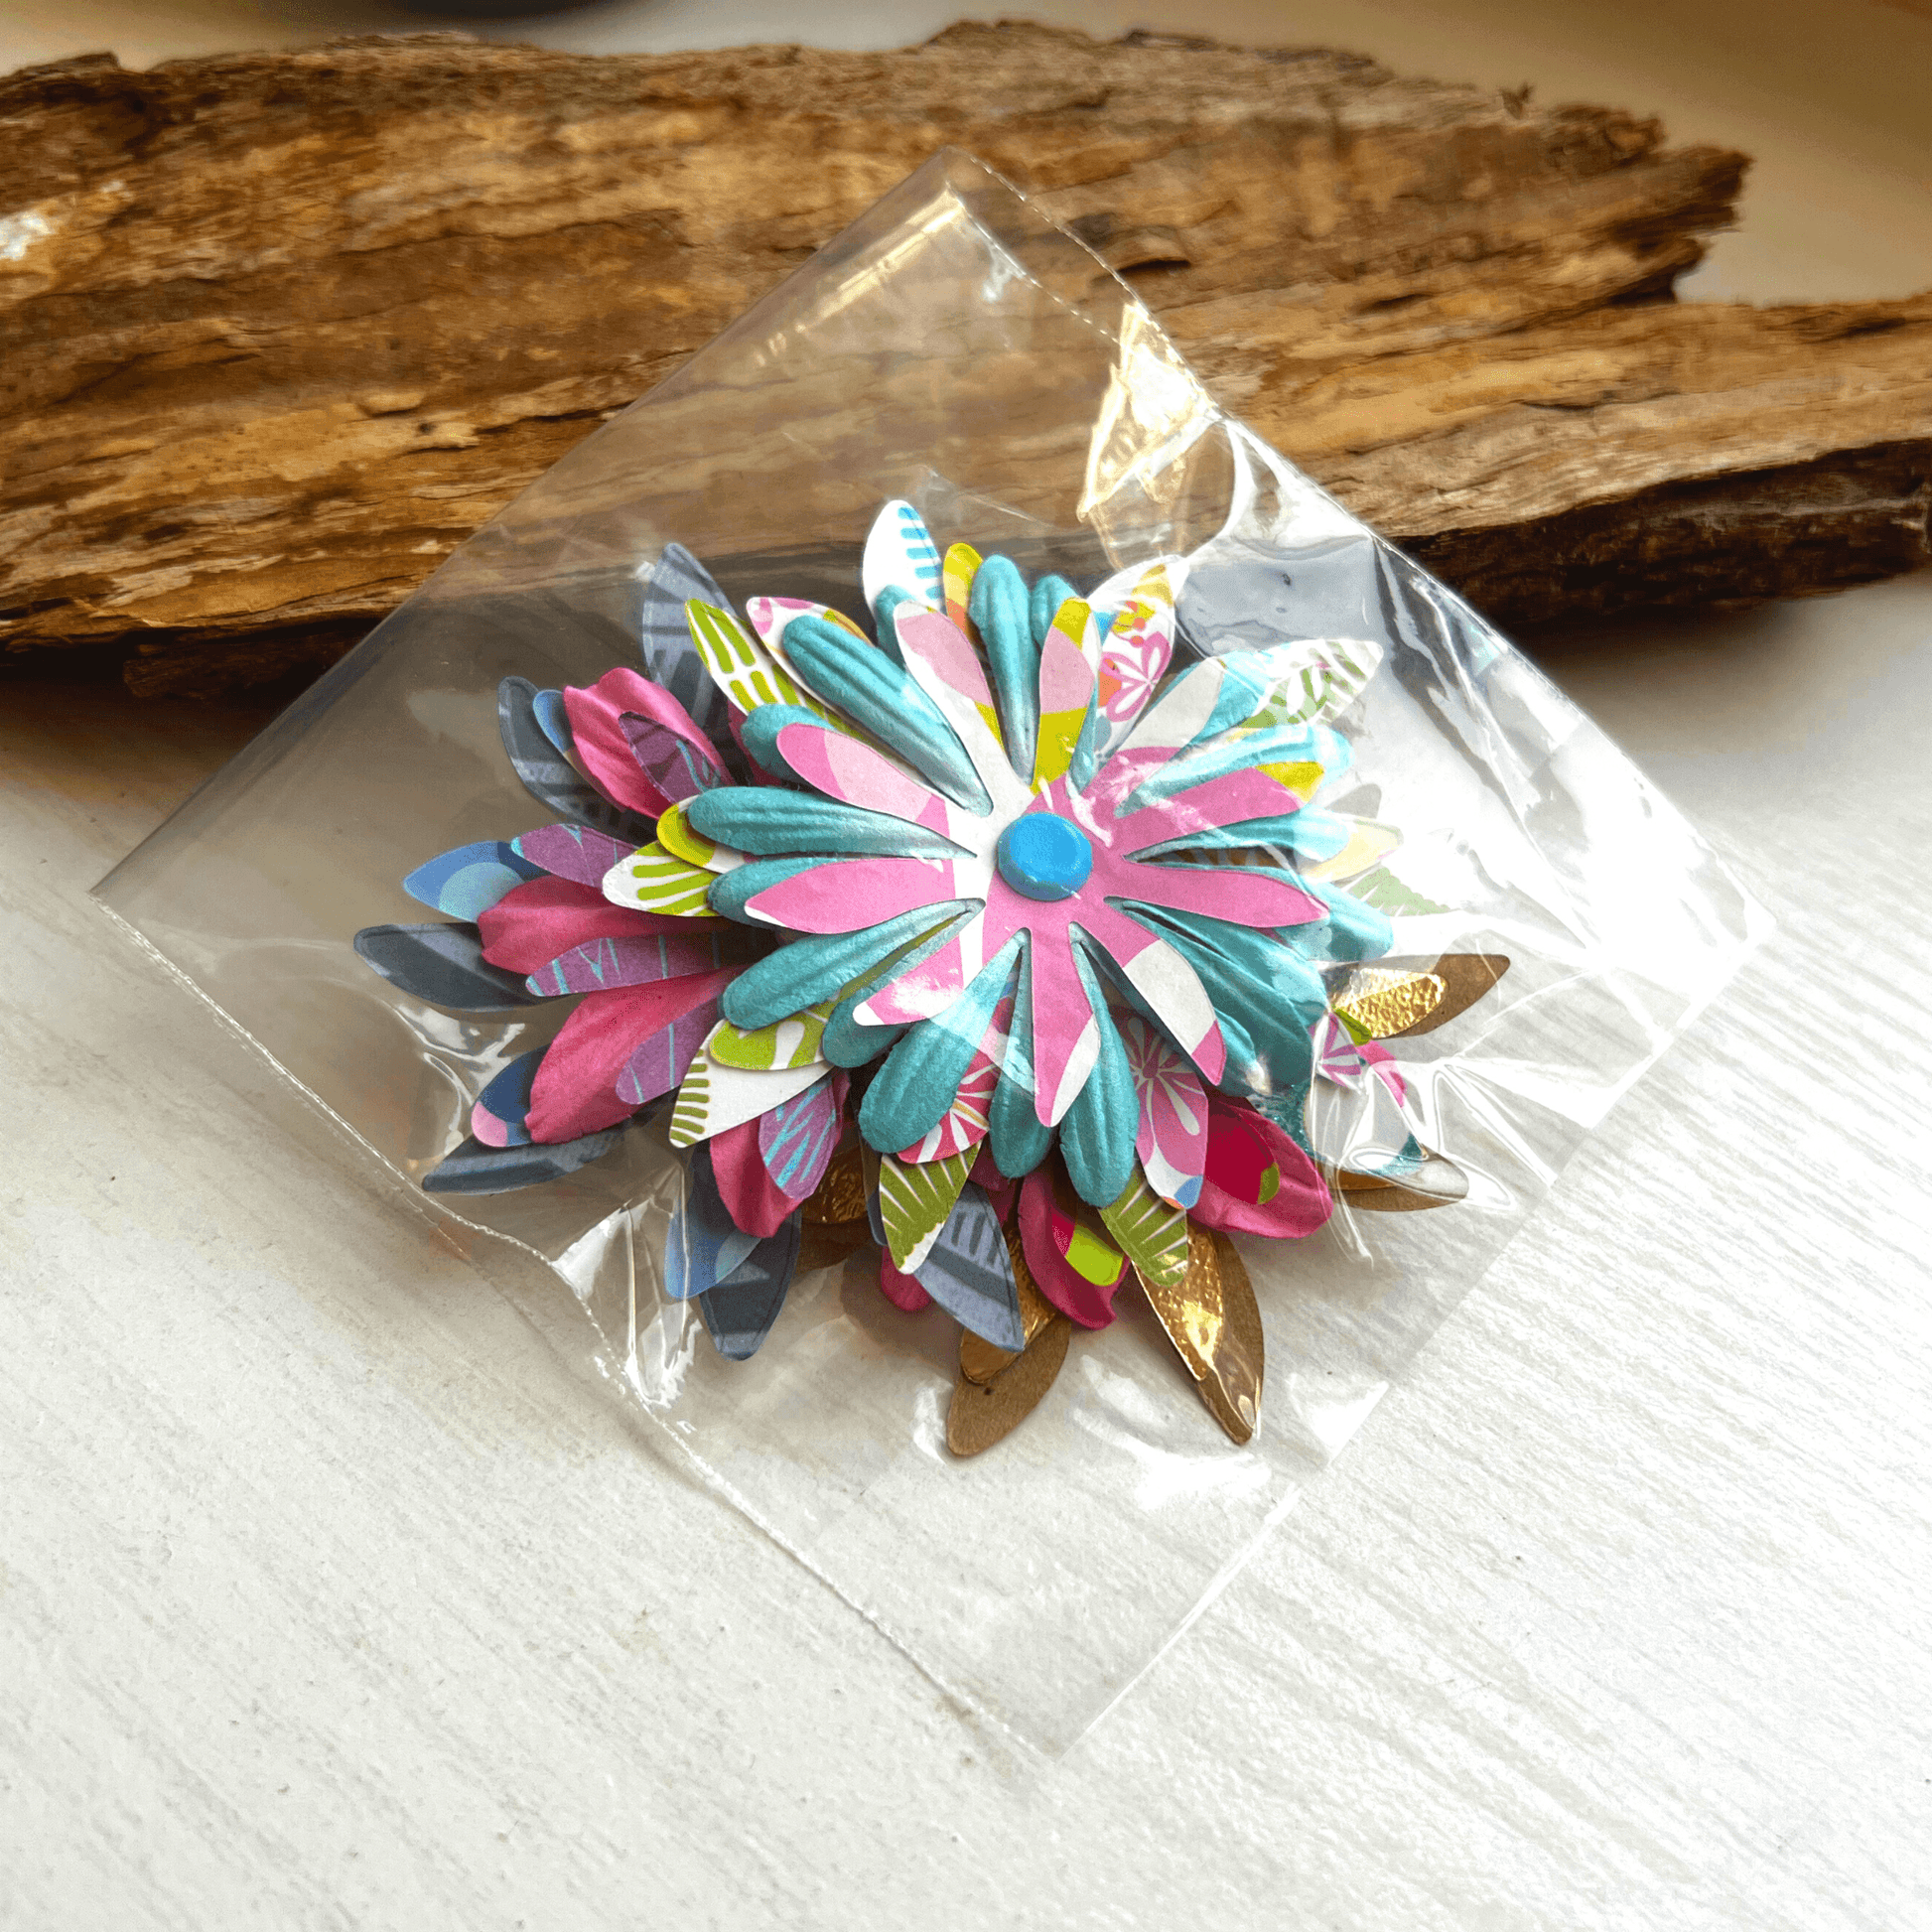 Layered Paper Flowers - Stones + Paper